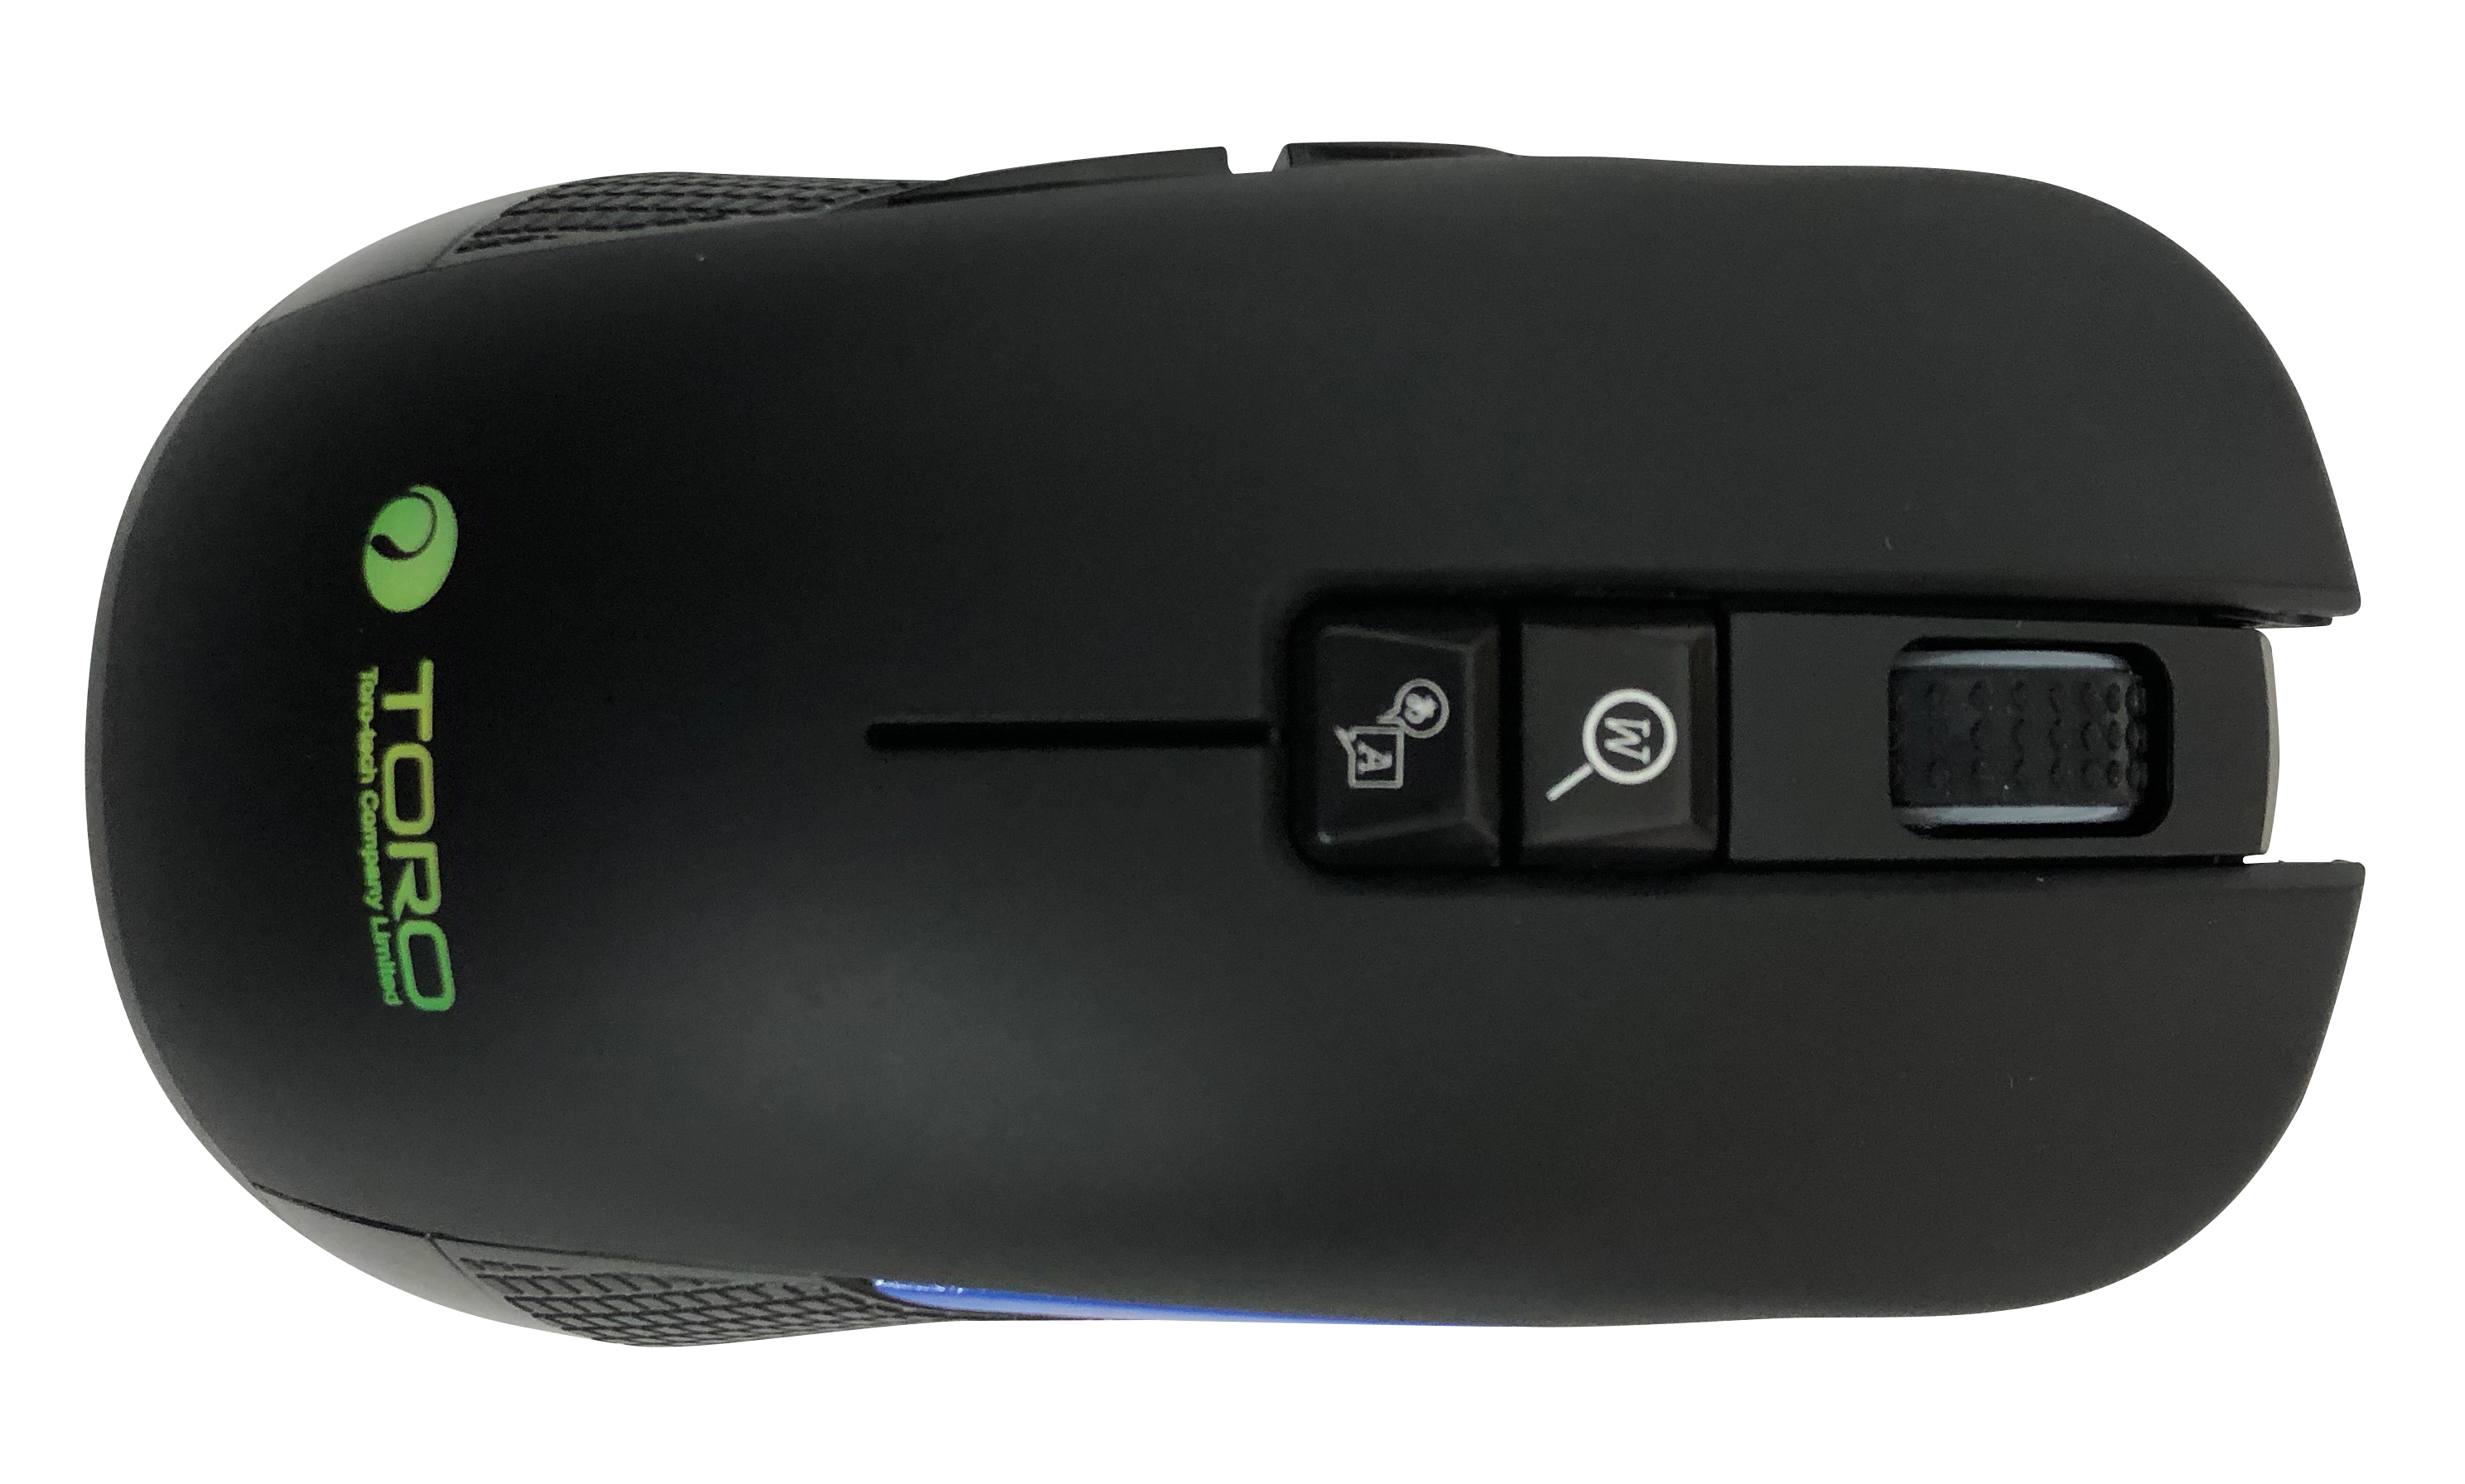 translete mouse MS01